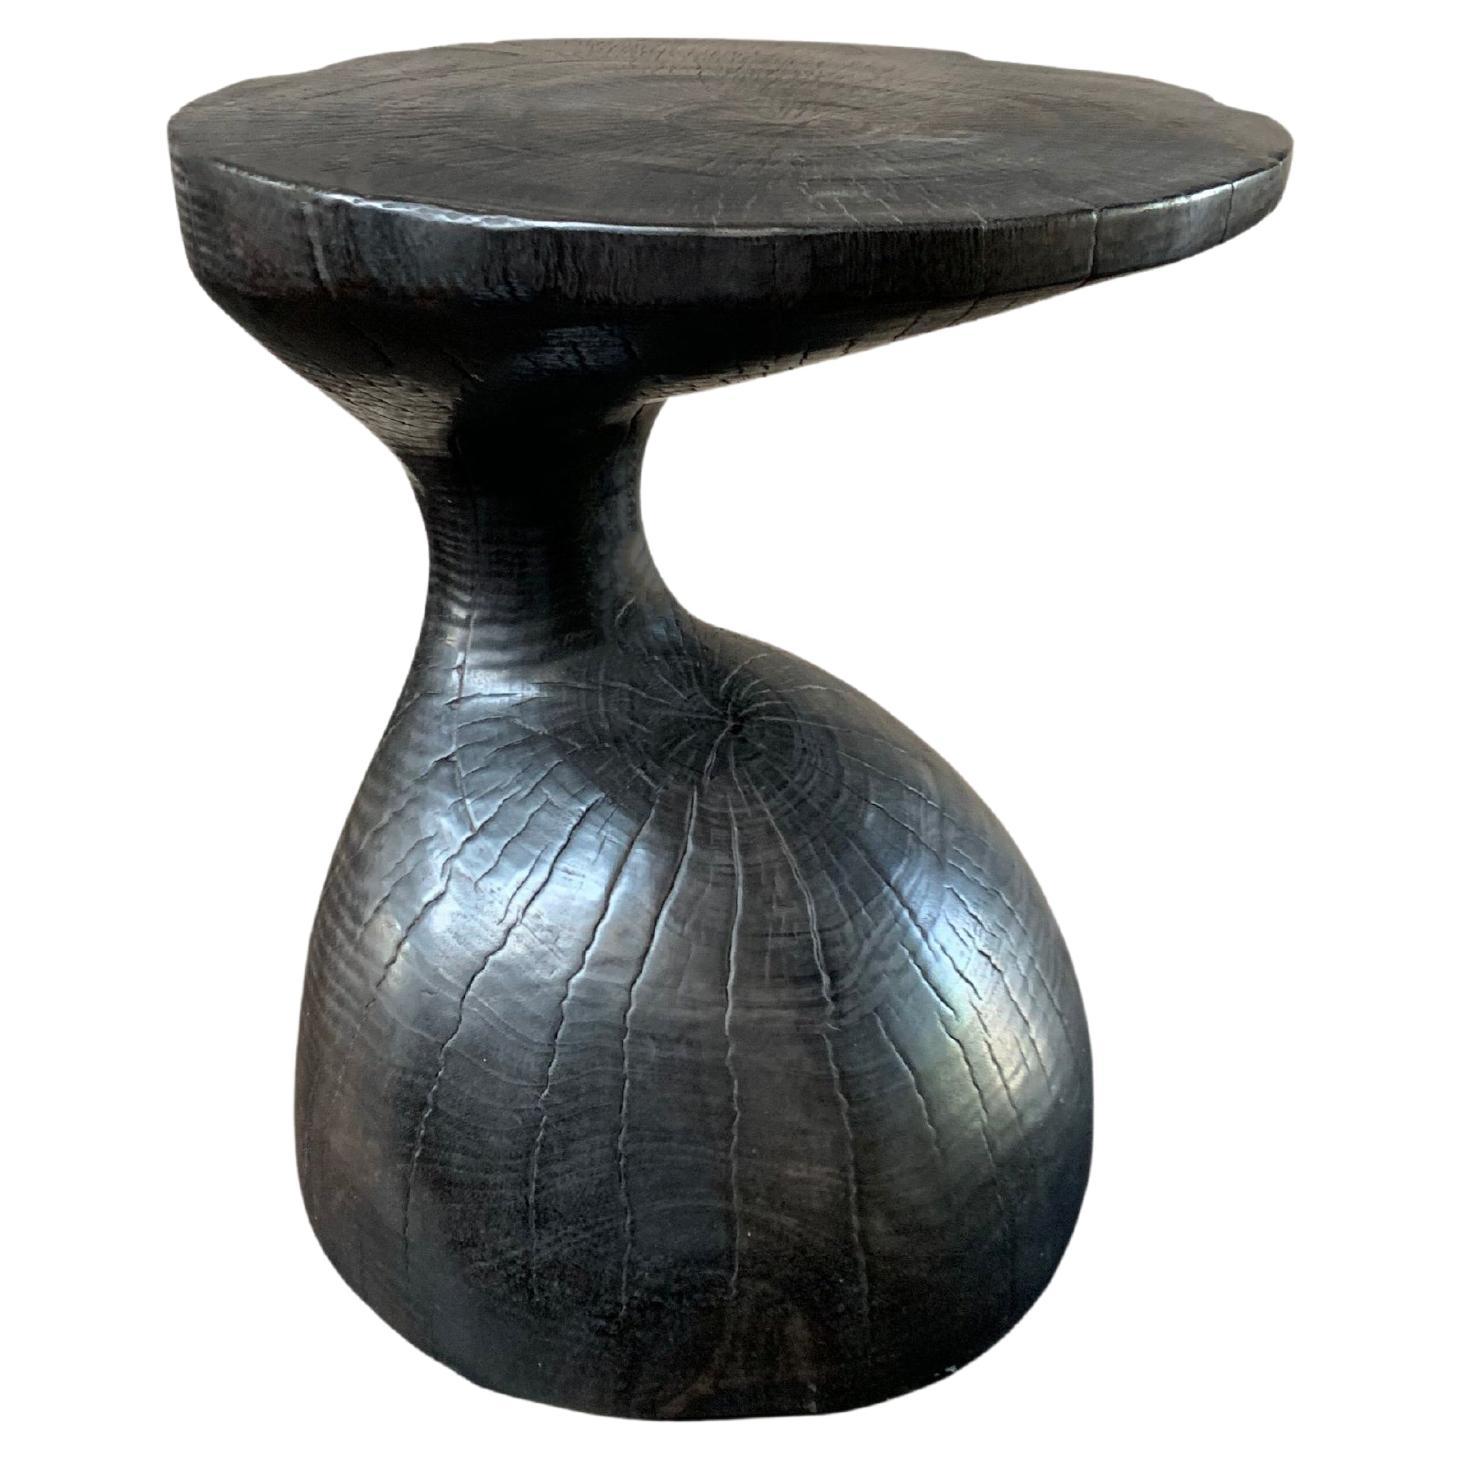 Solid Mango Wood Side Table with Burnt Finish, Modern Organic